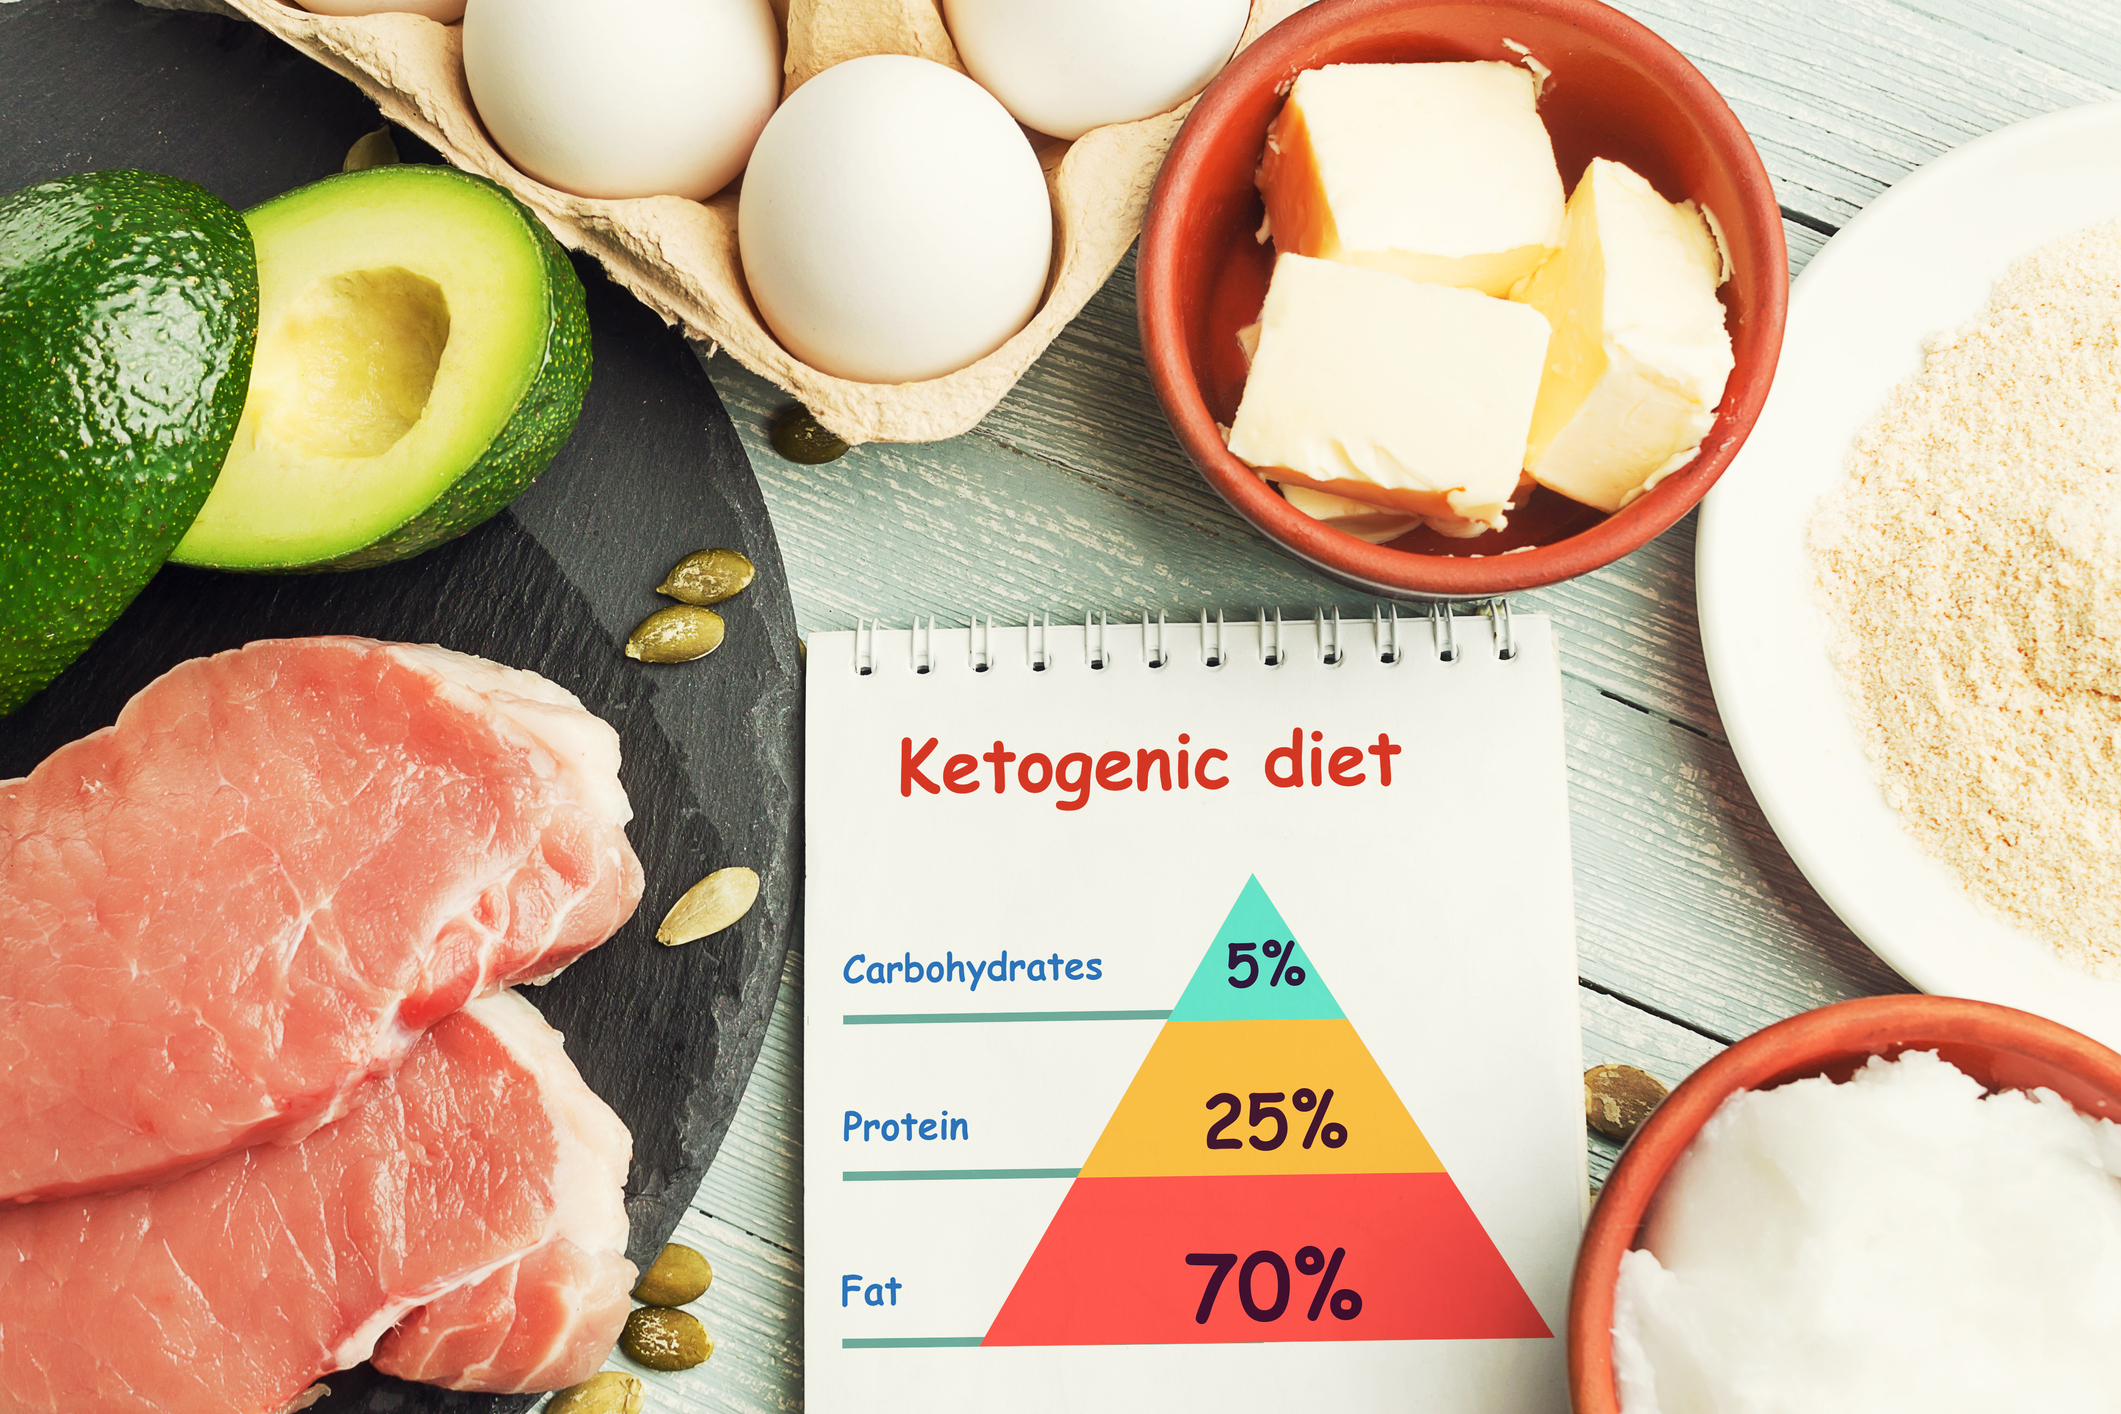 Keto: The diet that combats polycystic kidney disease